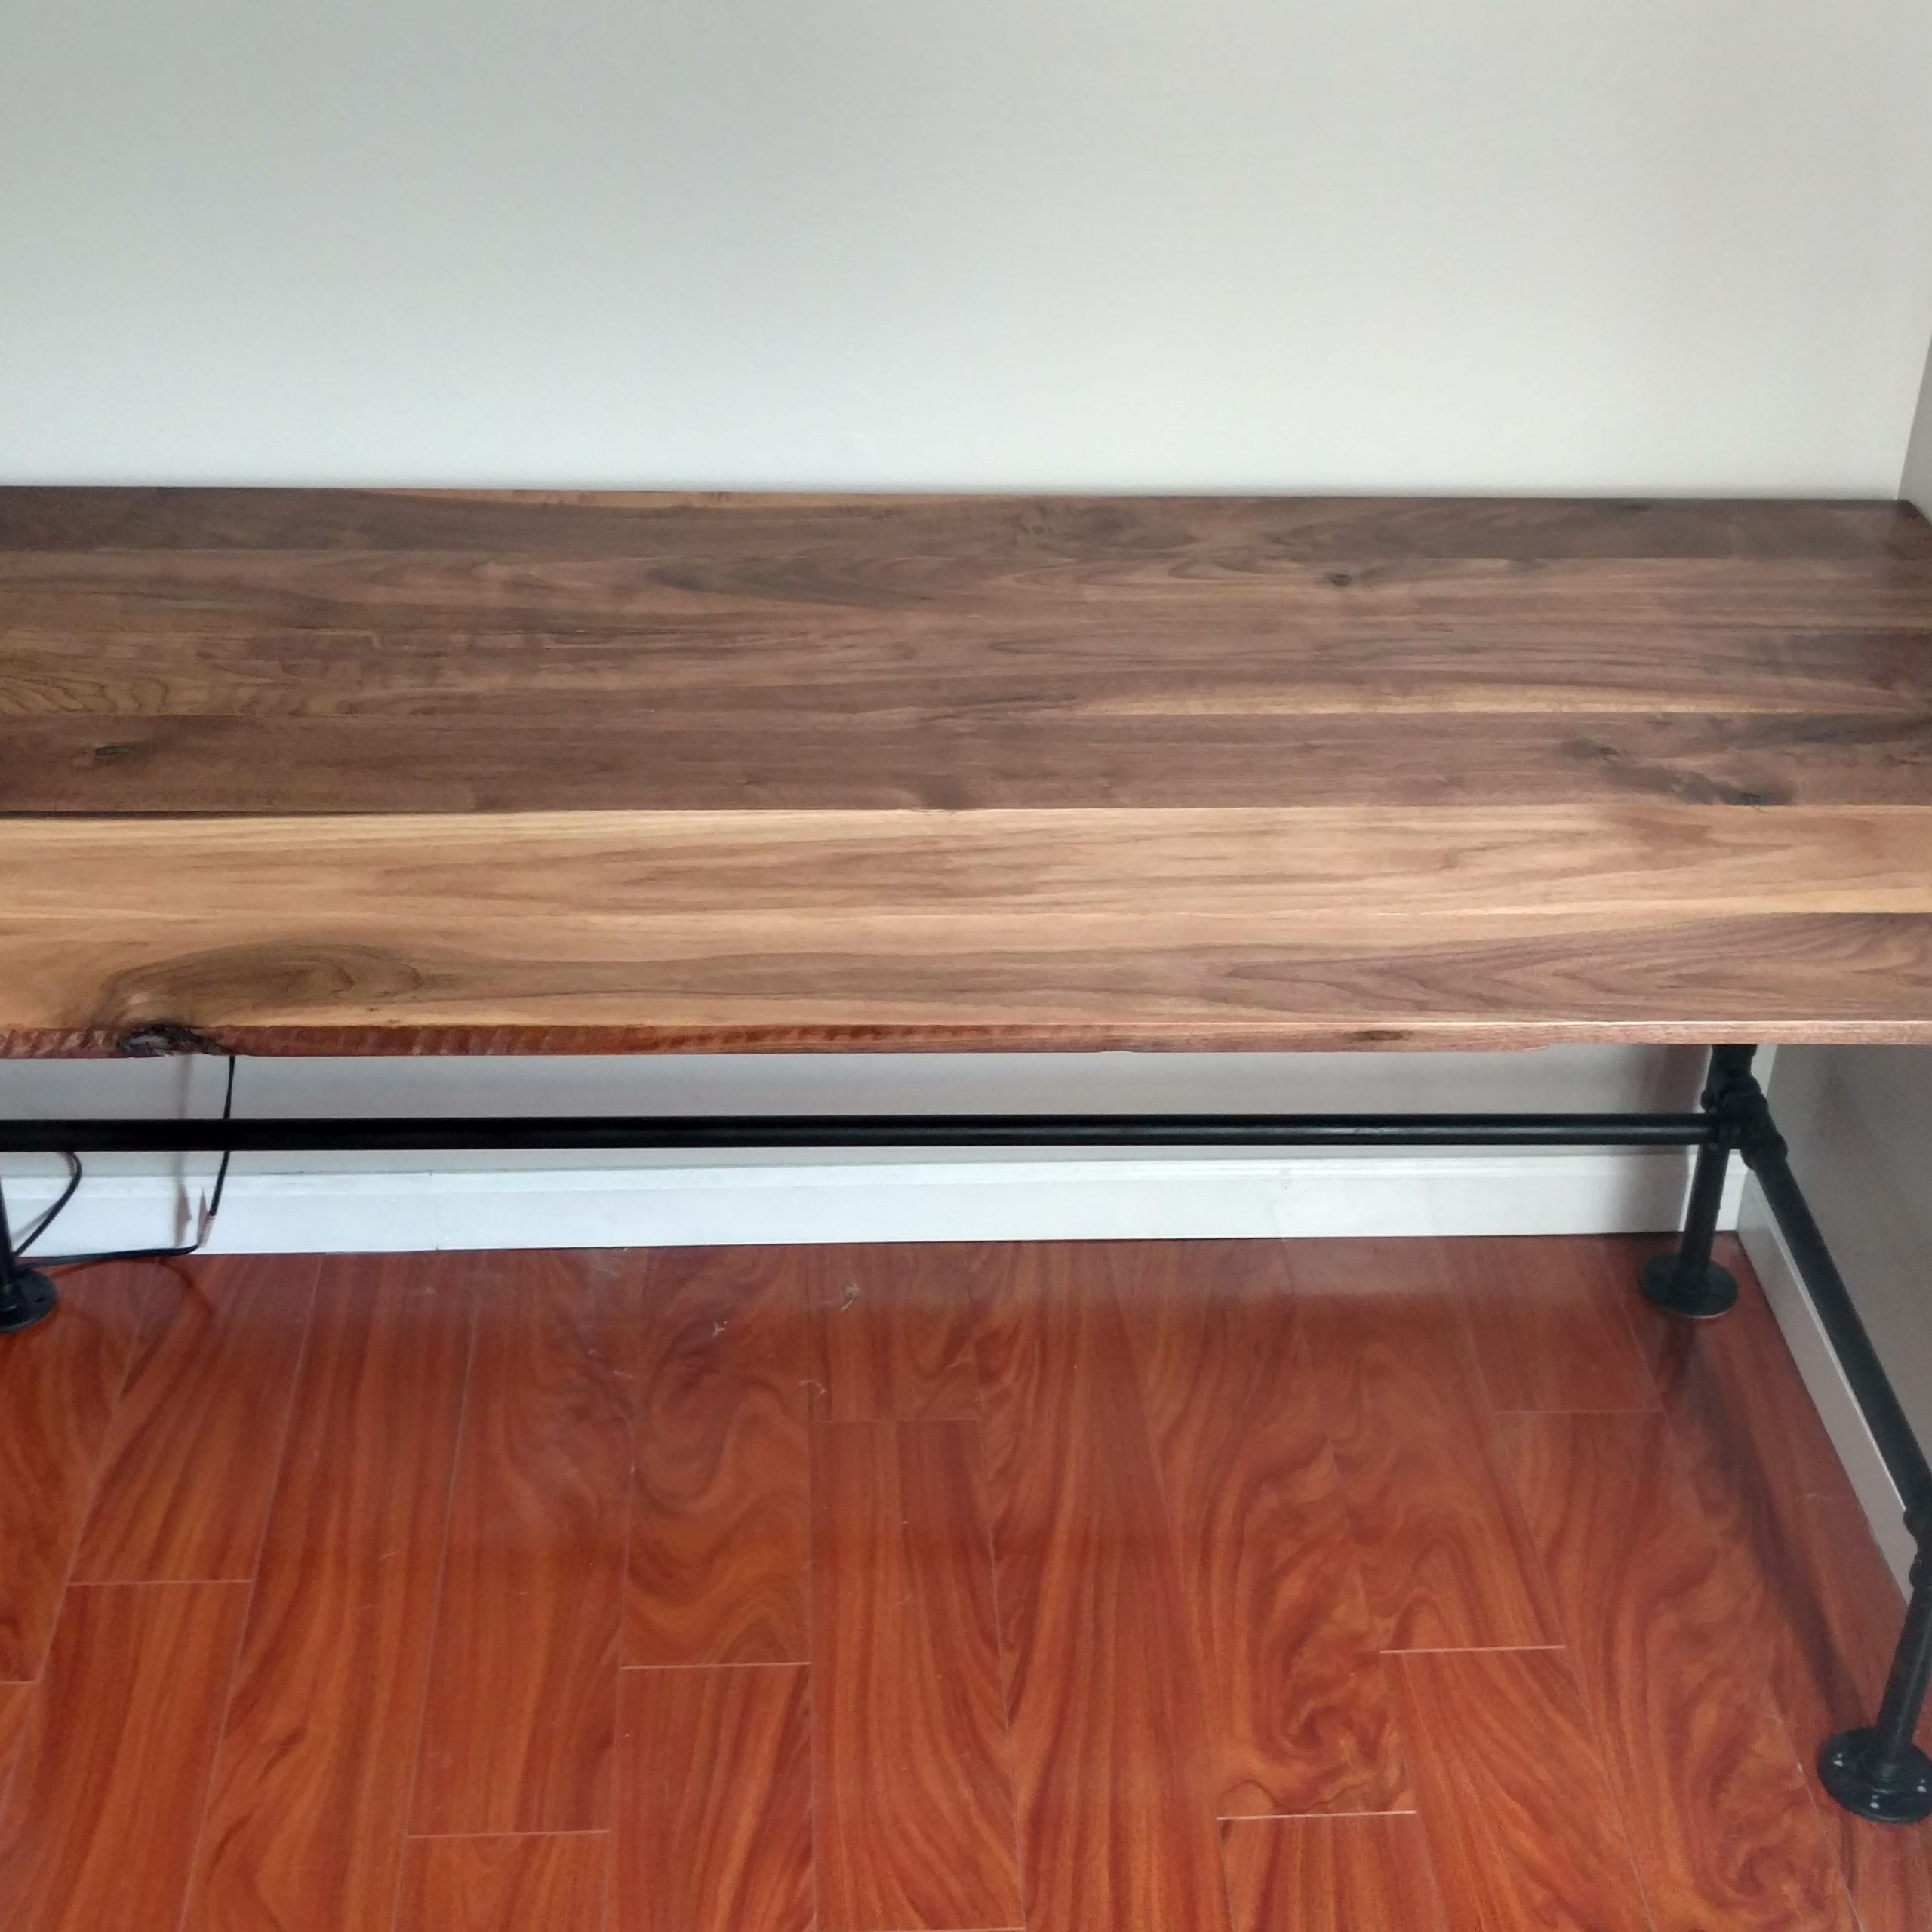 Walnut Office Computer Desk With Industrial Black Pipe Legs – Mq For Black Glass And Walnut Wood Office Desks (View 11 of 15)